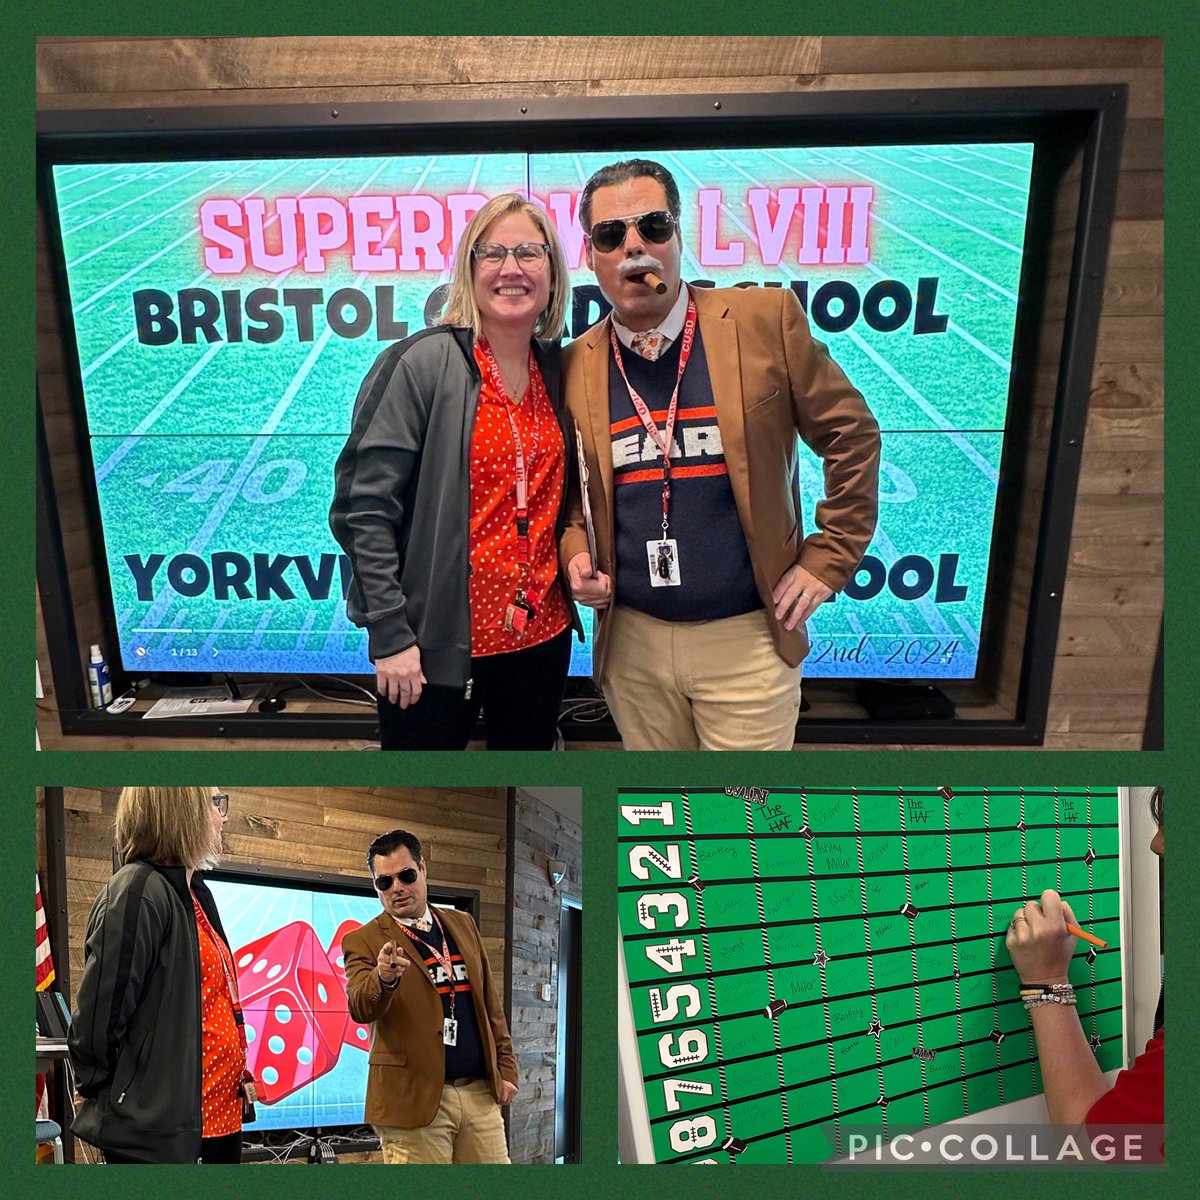 Super Bowl themed @Yorkville115 Institute Day? Yes!!! 🏈🏈 Well played @thehaf4 @115bgs @115ygs @K3withMrsB